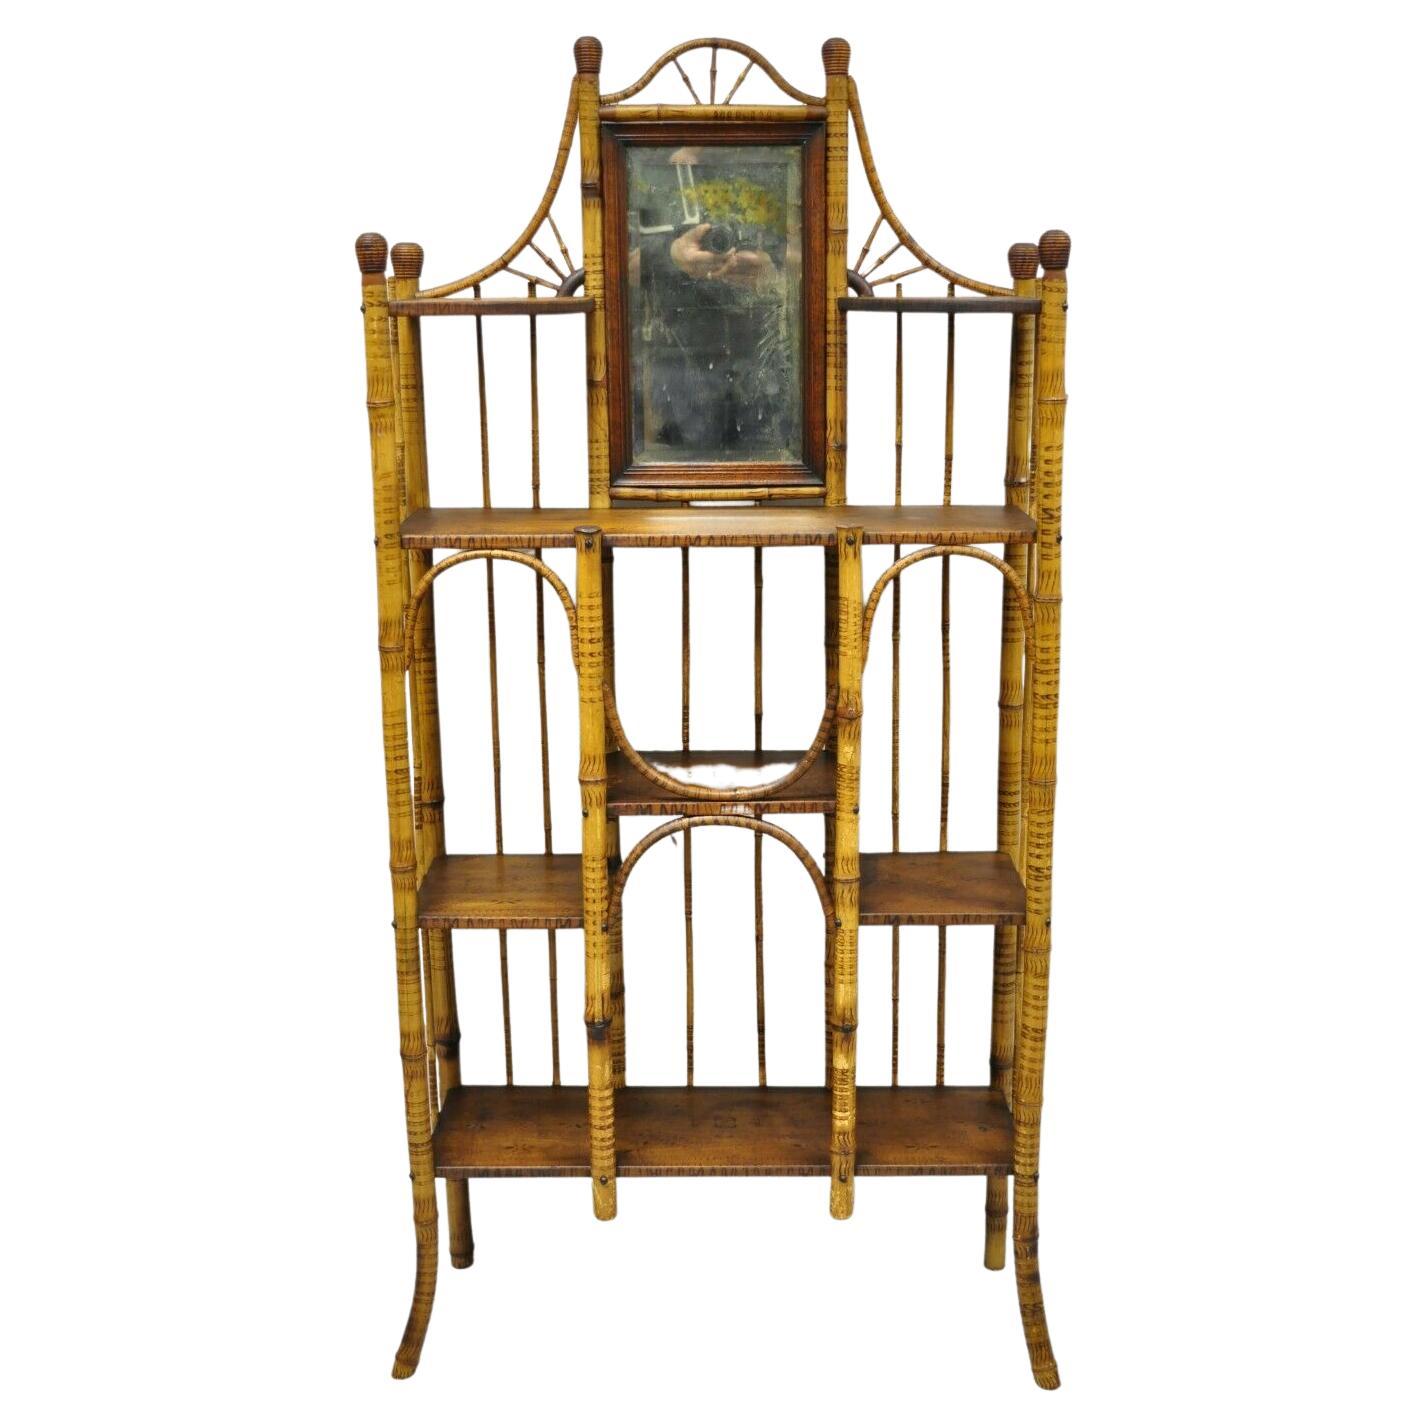 19th C. English Victorian Bamboo Stick and Ball Curio Shelf Display Etagere For Sale